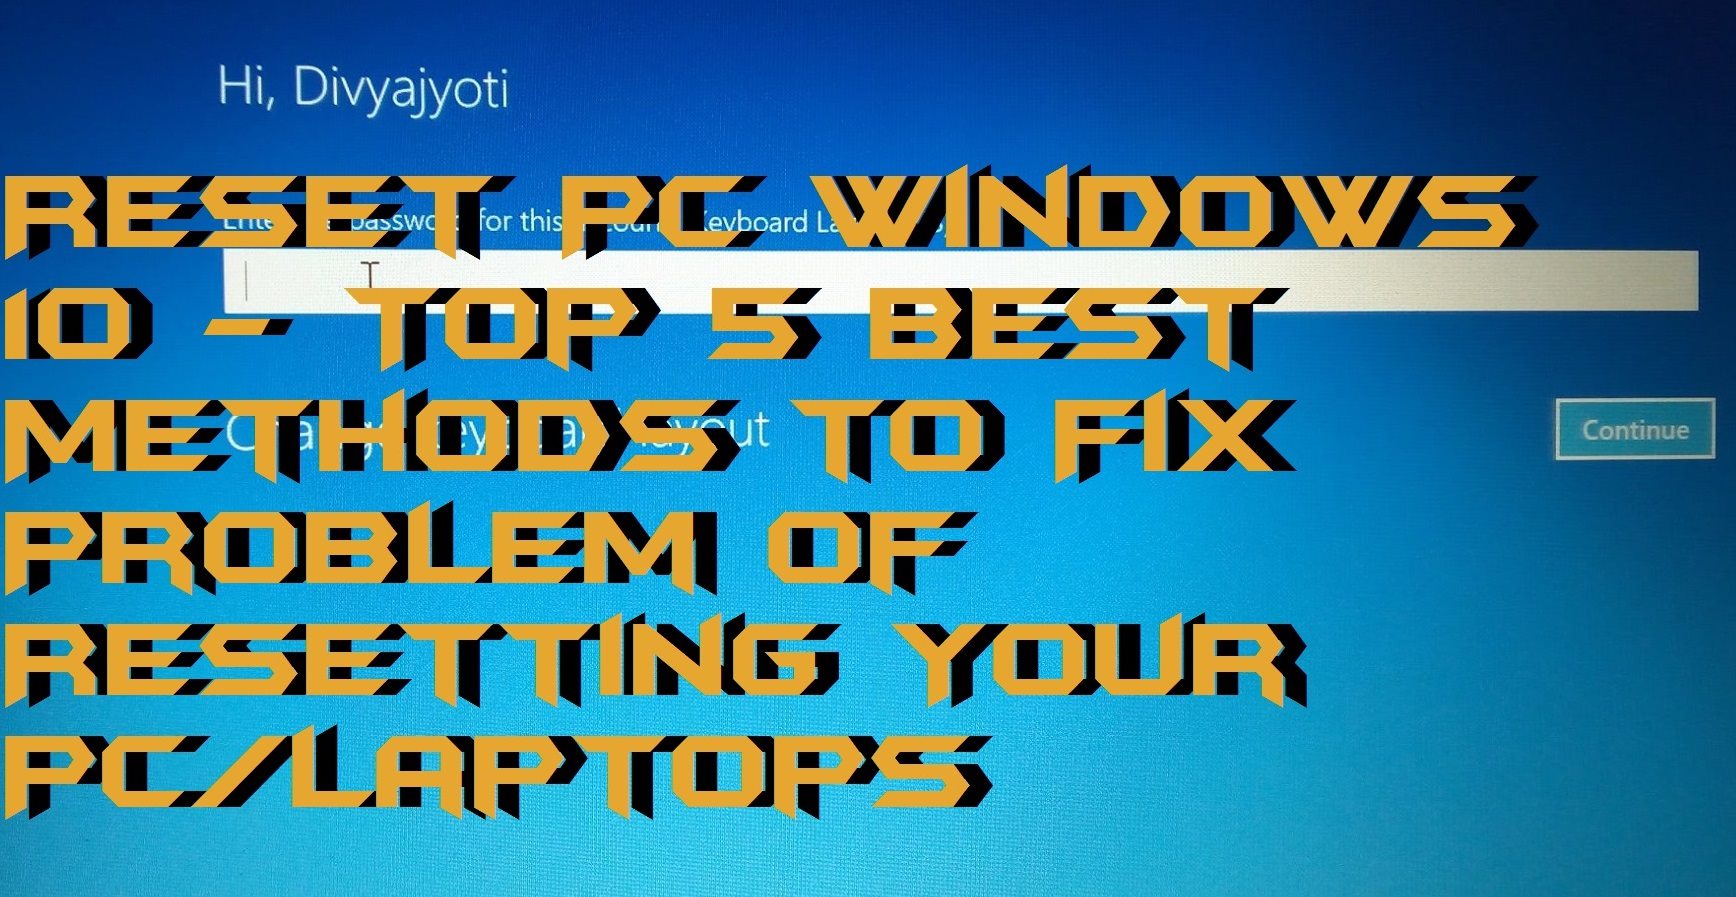 How to Reset PC Windows 10 - Top 5 Best Methods to Fix Problem of Resetting Your PC-Laptops